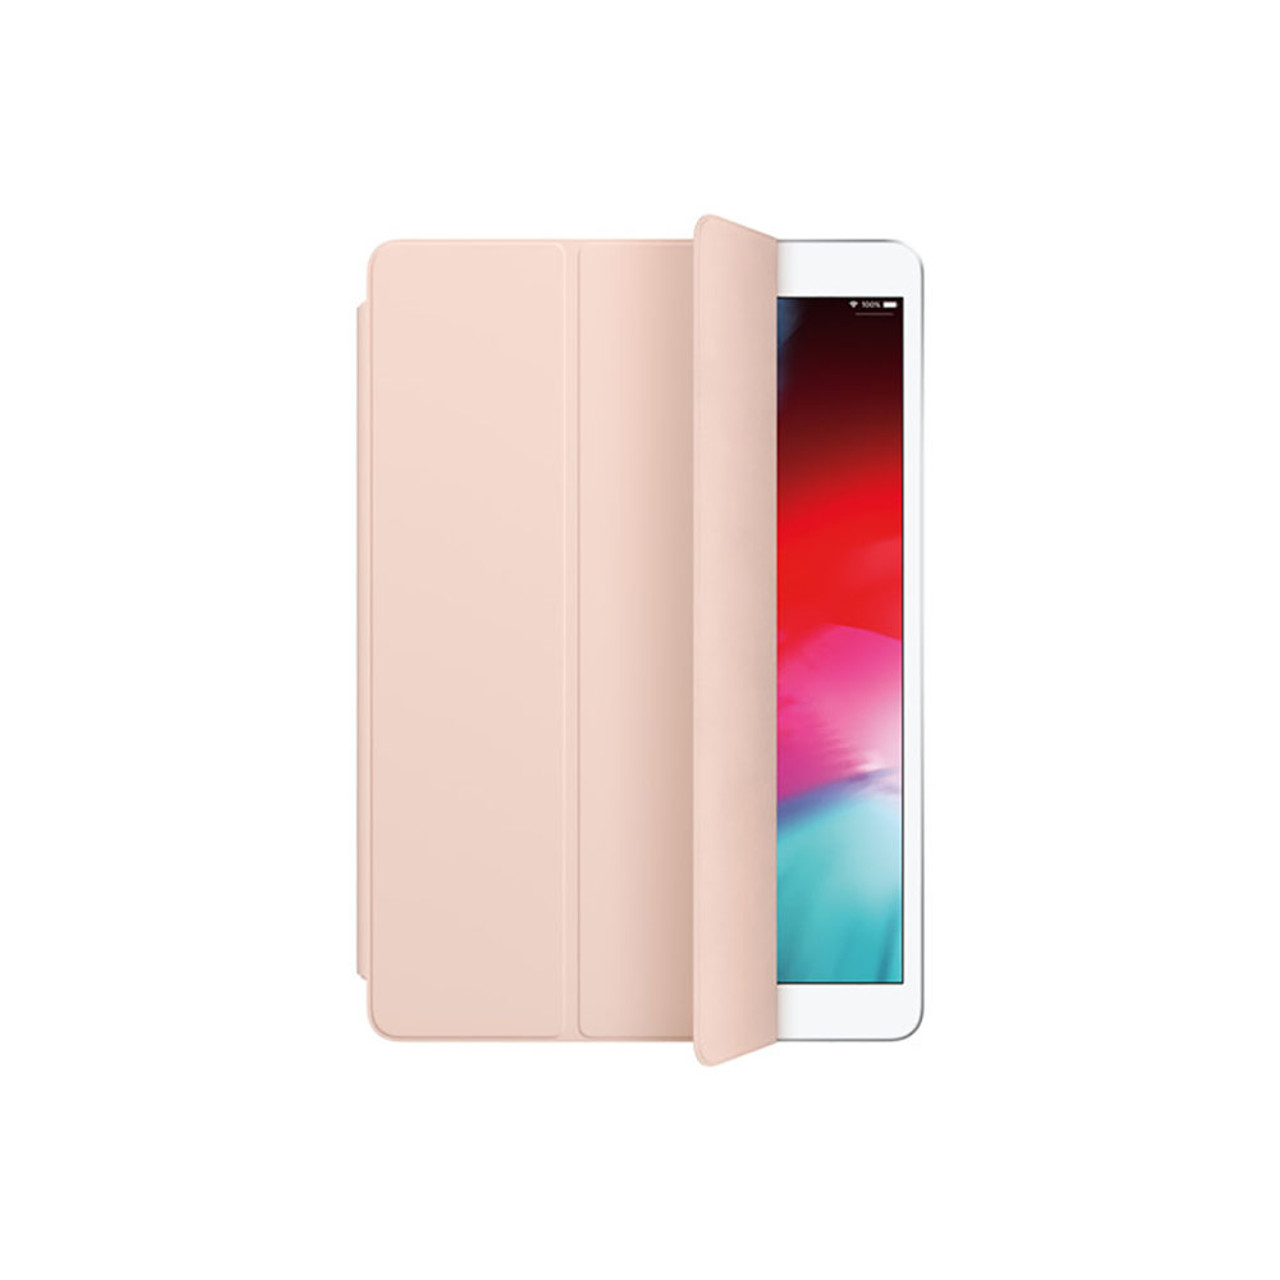 Katastrofe Indtil Frontier Original Apple Smart Cover for Apple 10.5" iPad Pro, iPad Air, 10.2" (8th  Generation) and 10.2" (7th Generation) - Pink Sand - Unlimited Cellular